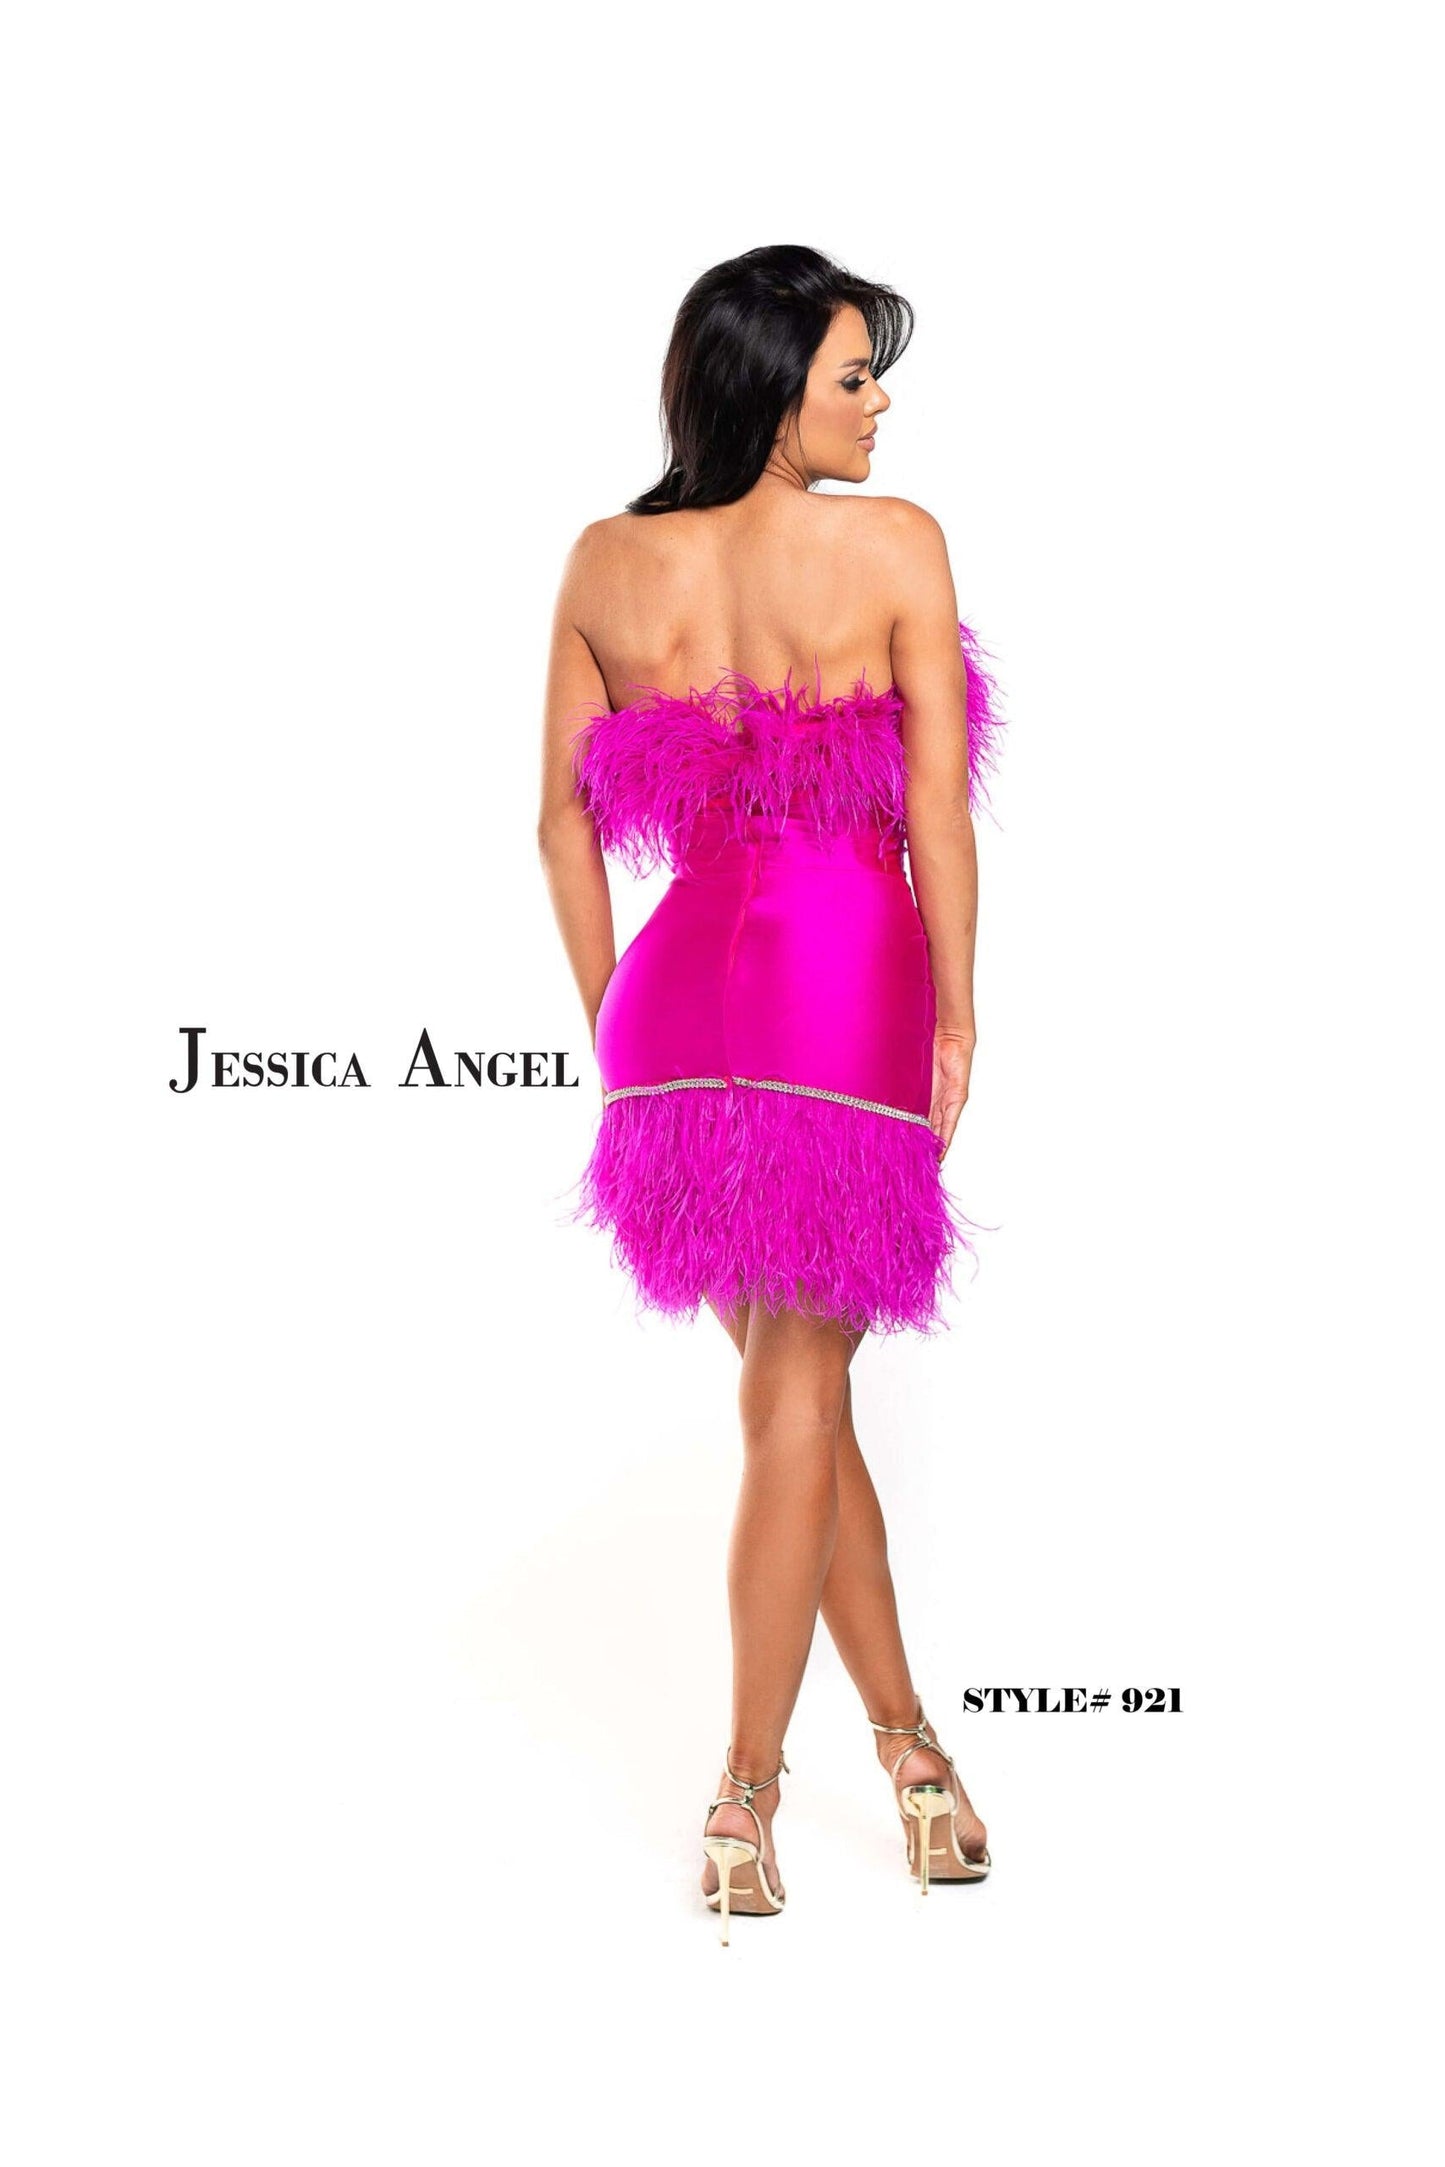 Jessica Angel Short Strapless Cocktail Dress 921 - The Dress Outlet